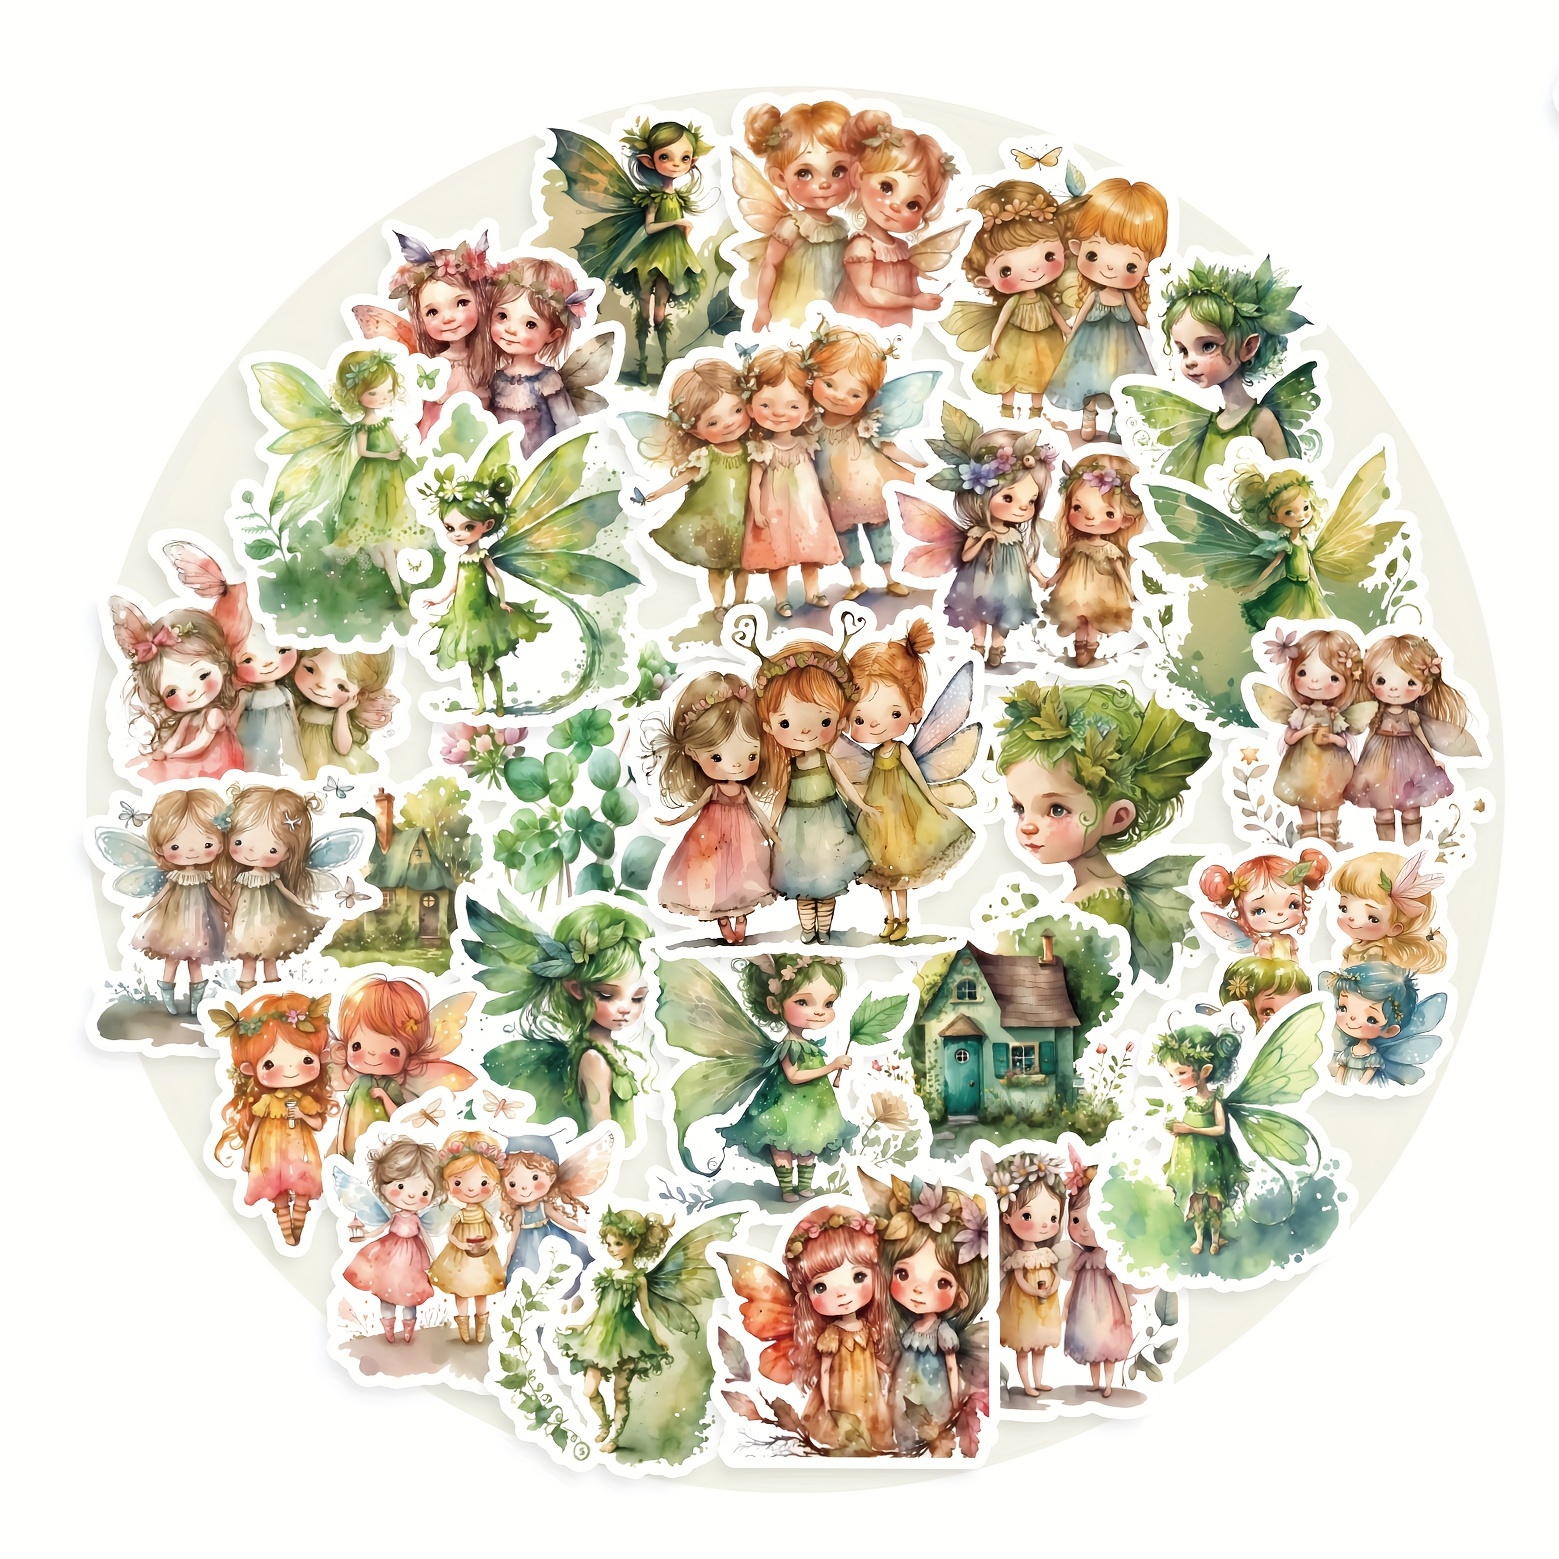 

66pcs Cartoon Stickers Fairies Little Spirits Stickers Green Forest Nature Theme Stickers For Water Bottle, Aesthetic Vinyl Waterproof Decals For Laptop Phone Art Journal Diy Crafts